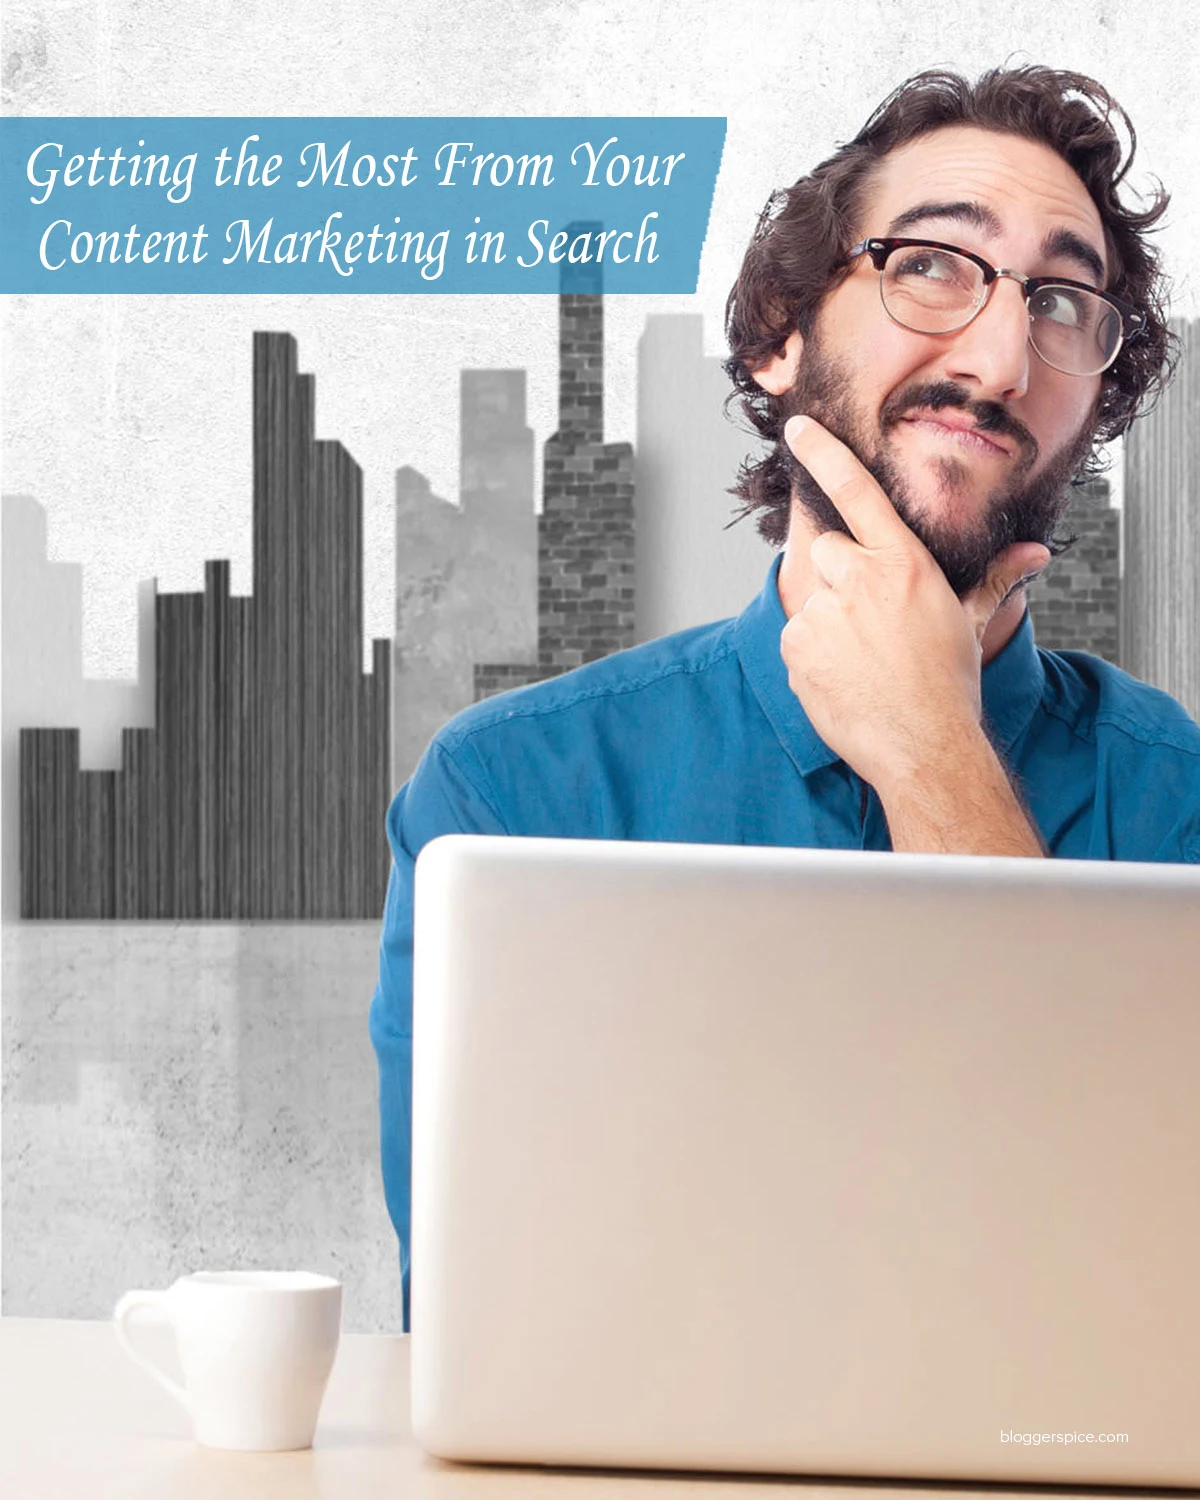 A Guide to Getting the Most Out of Your Content Marketing.